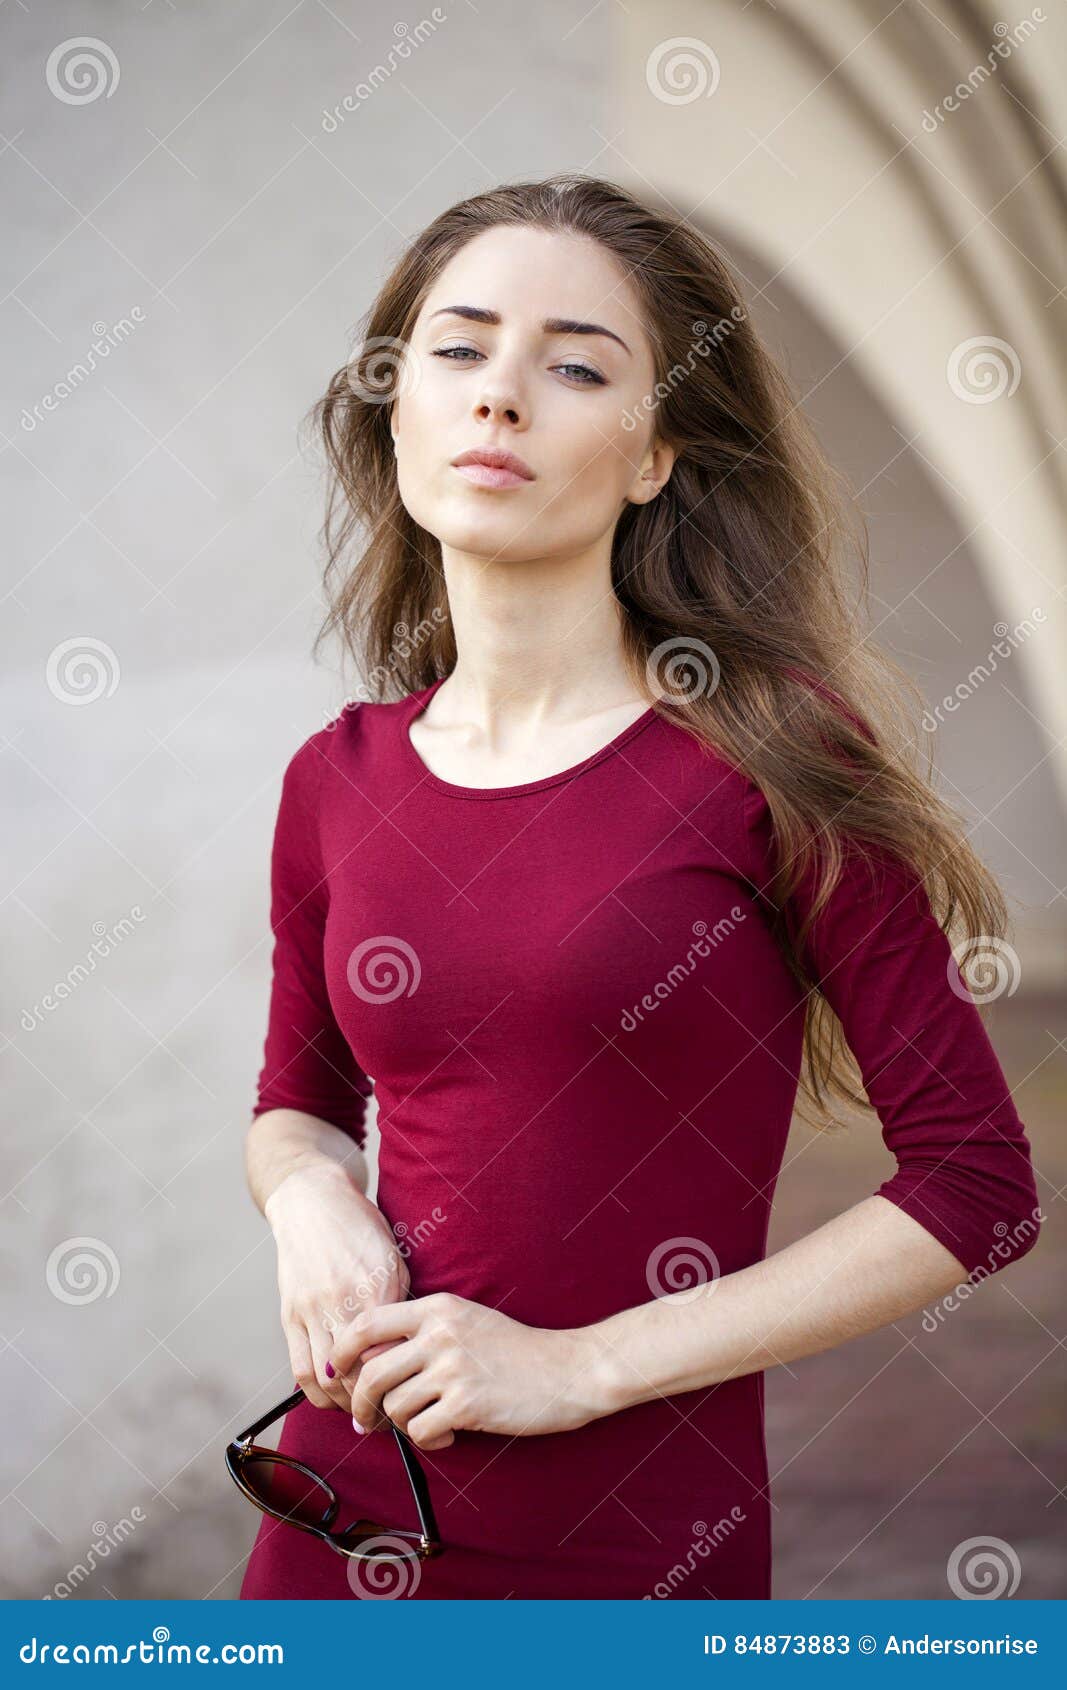 Portrait Of A Young Beautiful Brunette Woman Stock Image Image Of Brunette Adult 84873883 